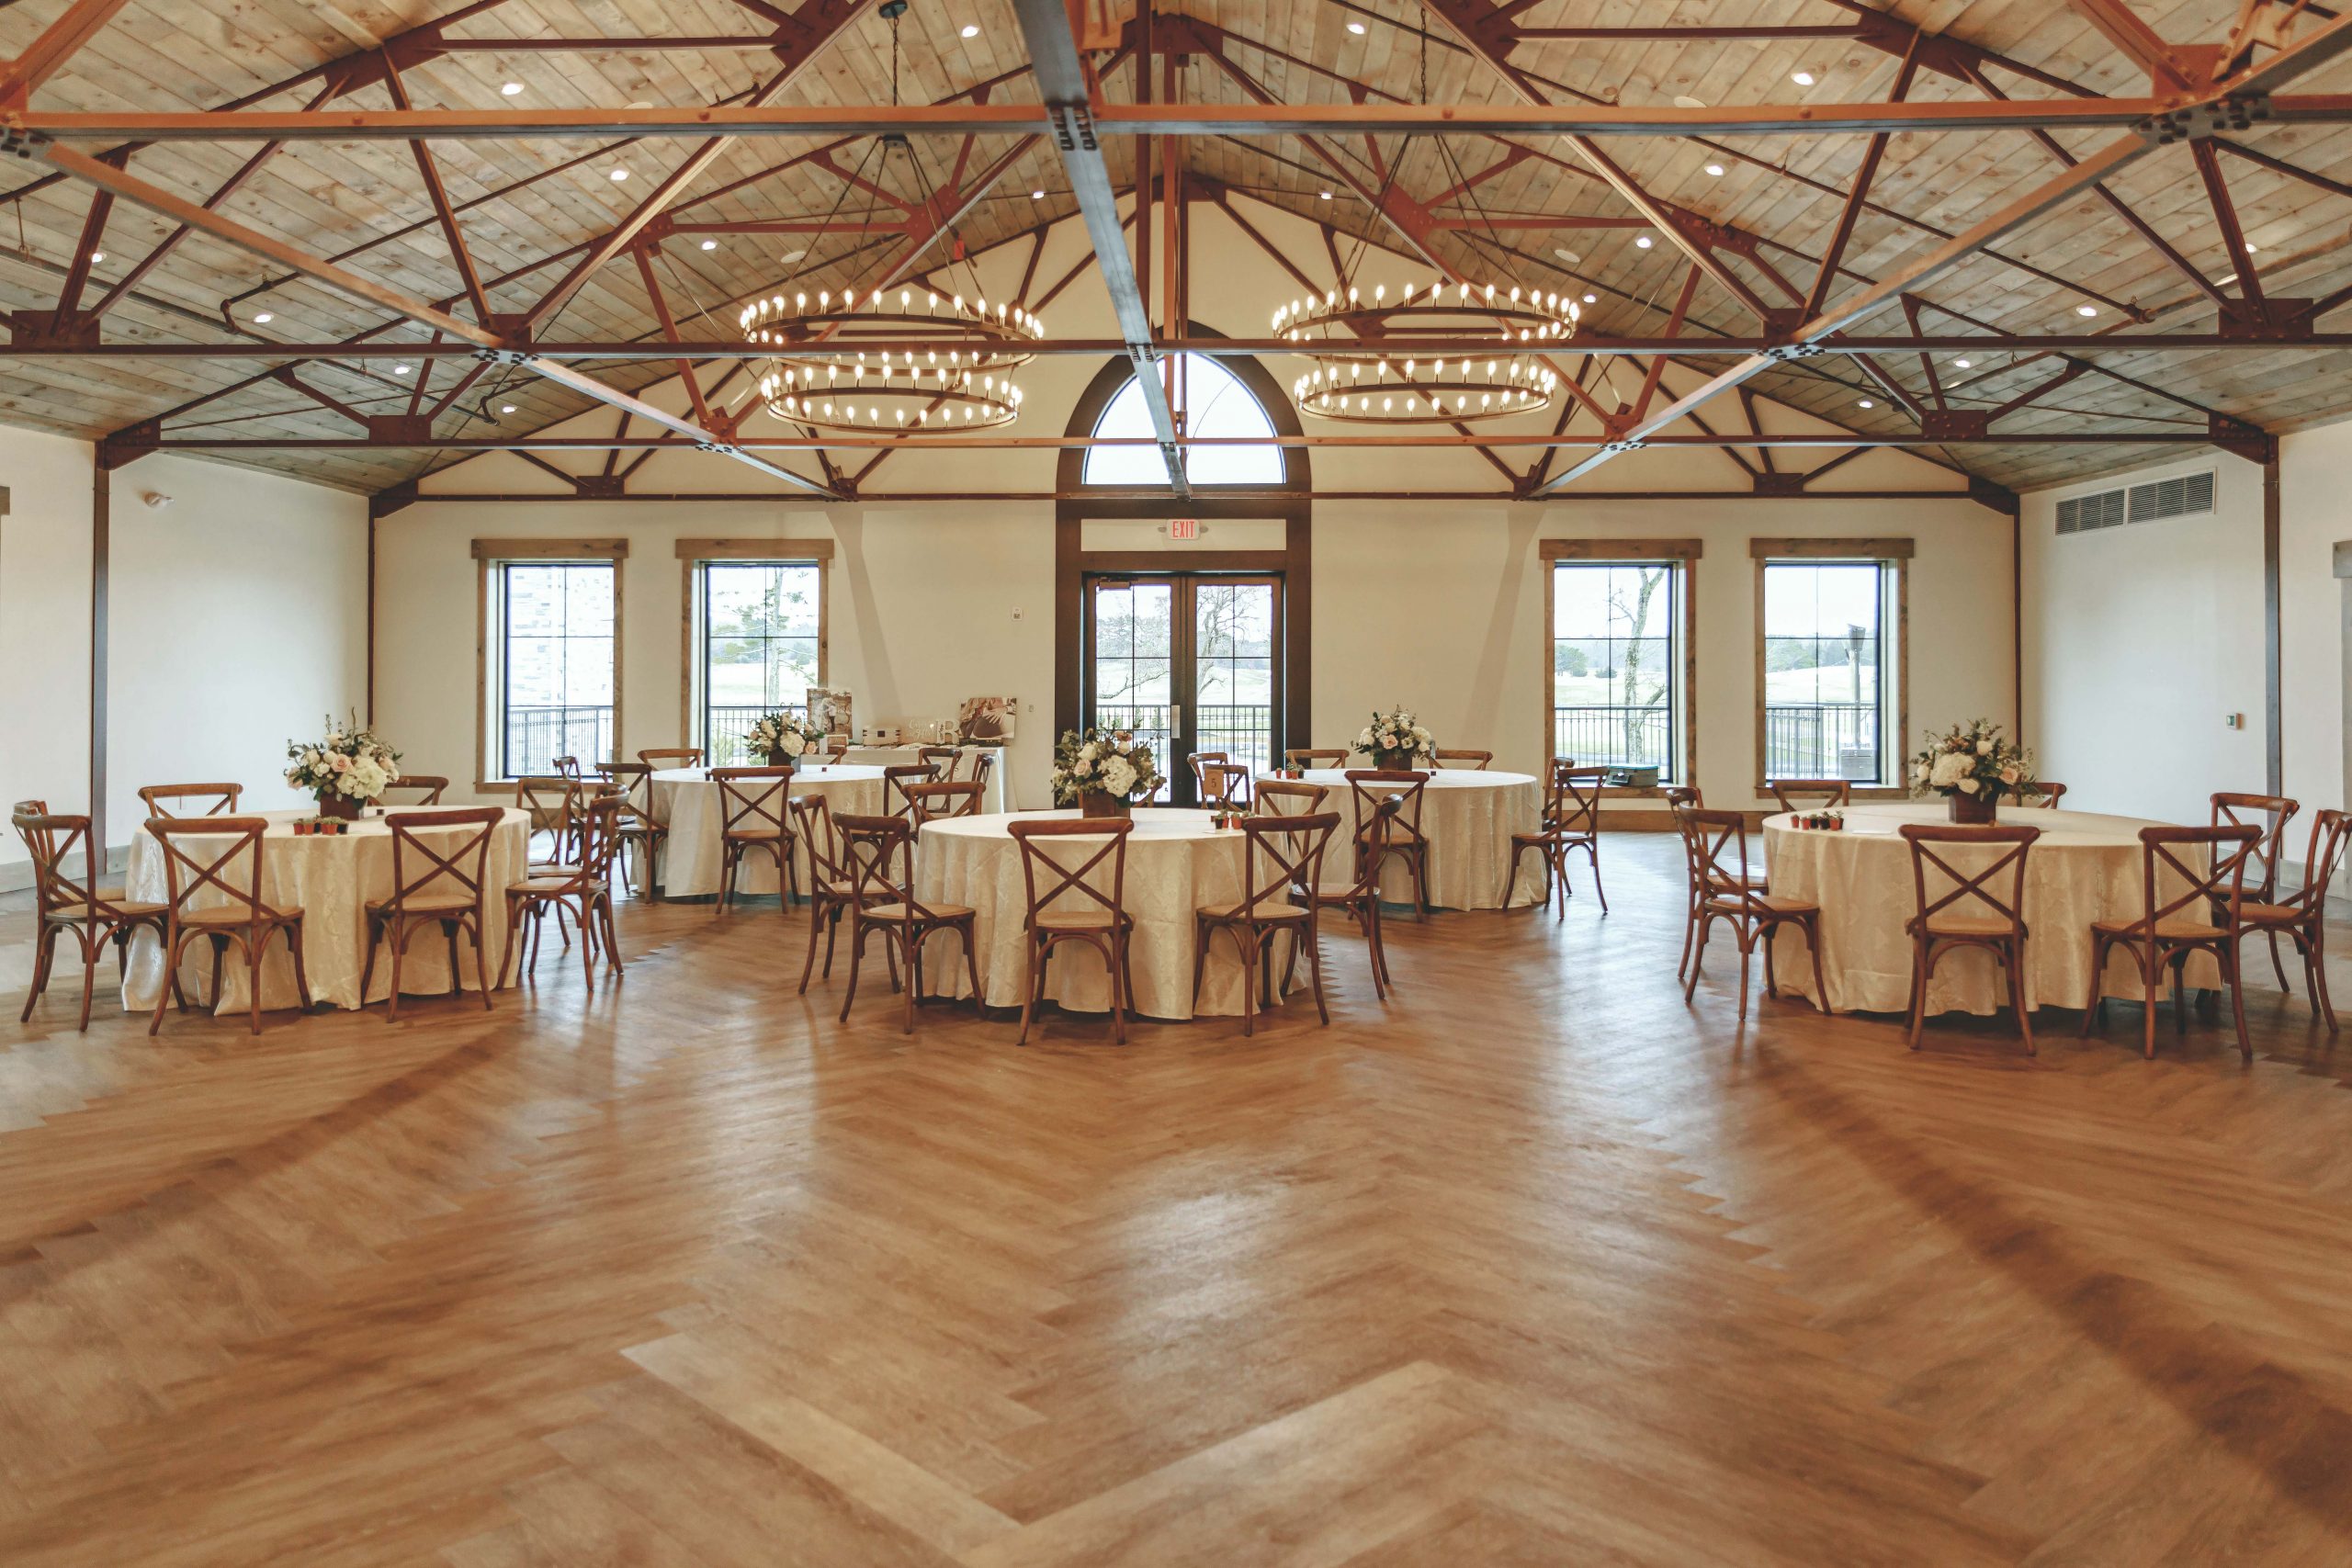 Renault Winery South Jersey wedding venue